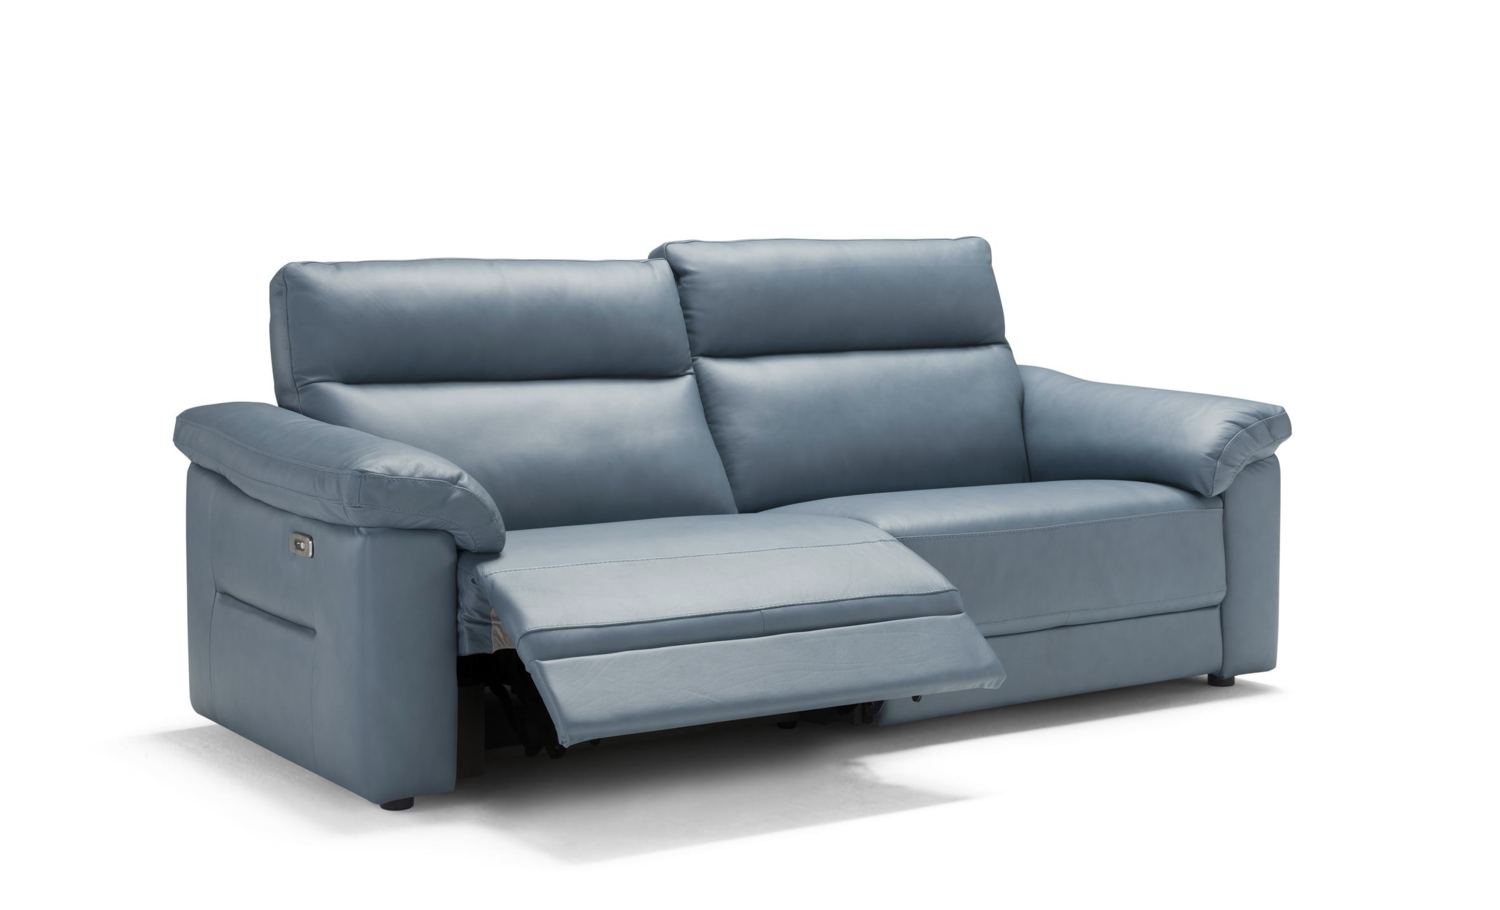 Betler Leather Couch